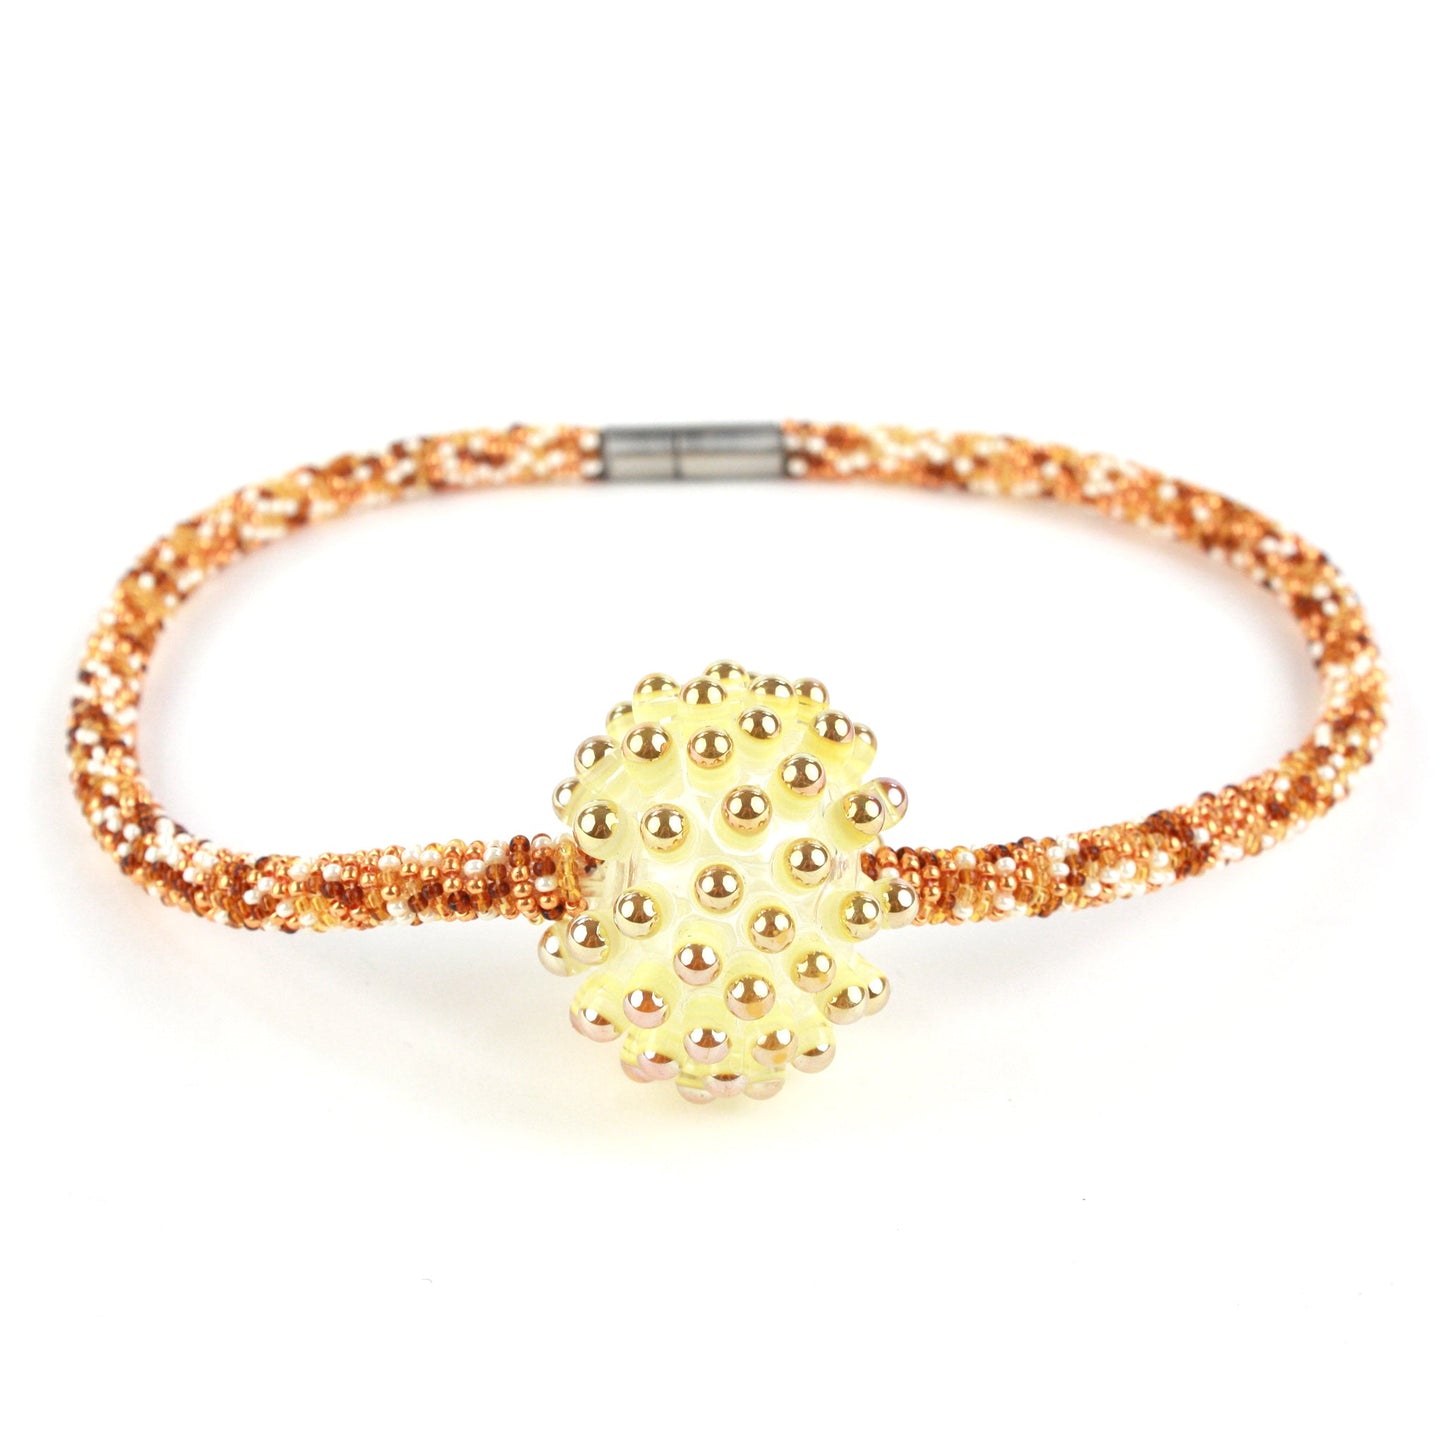 Stacked dot solo necklace-amber, ivory and gold